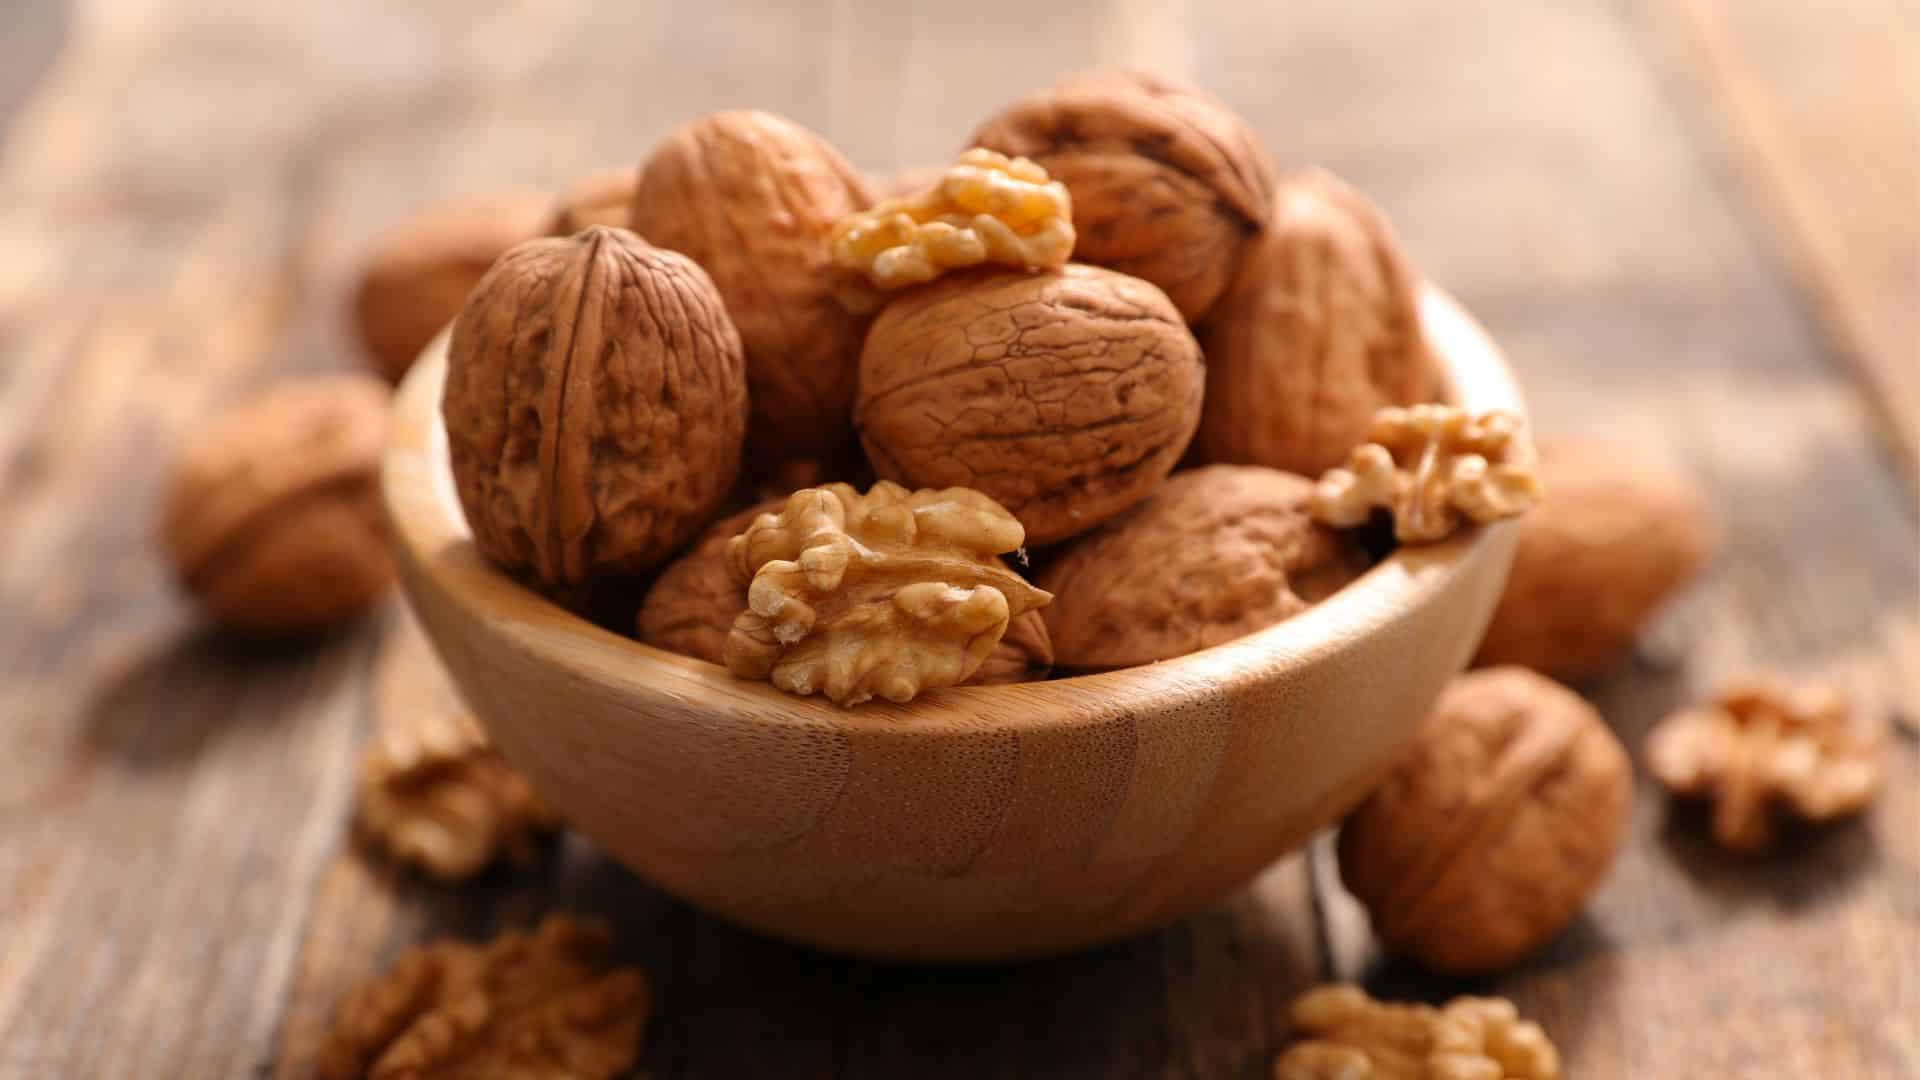 Adding walnuts to daily diet shows positive effects on mental health